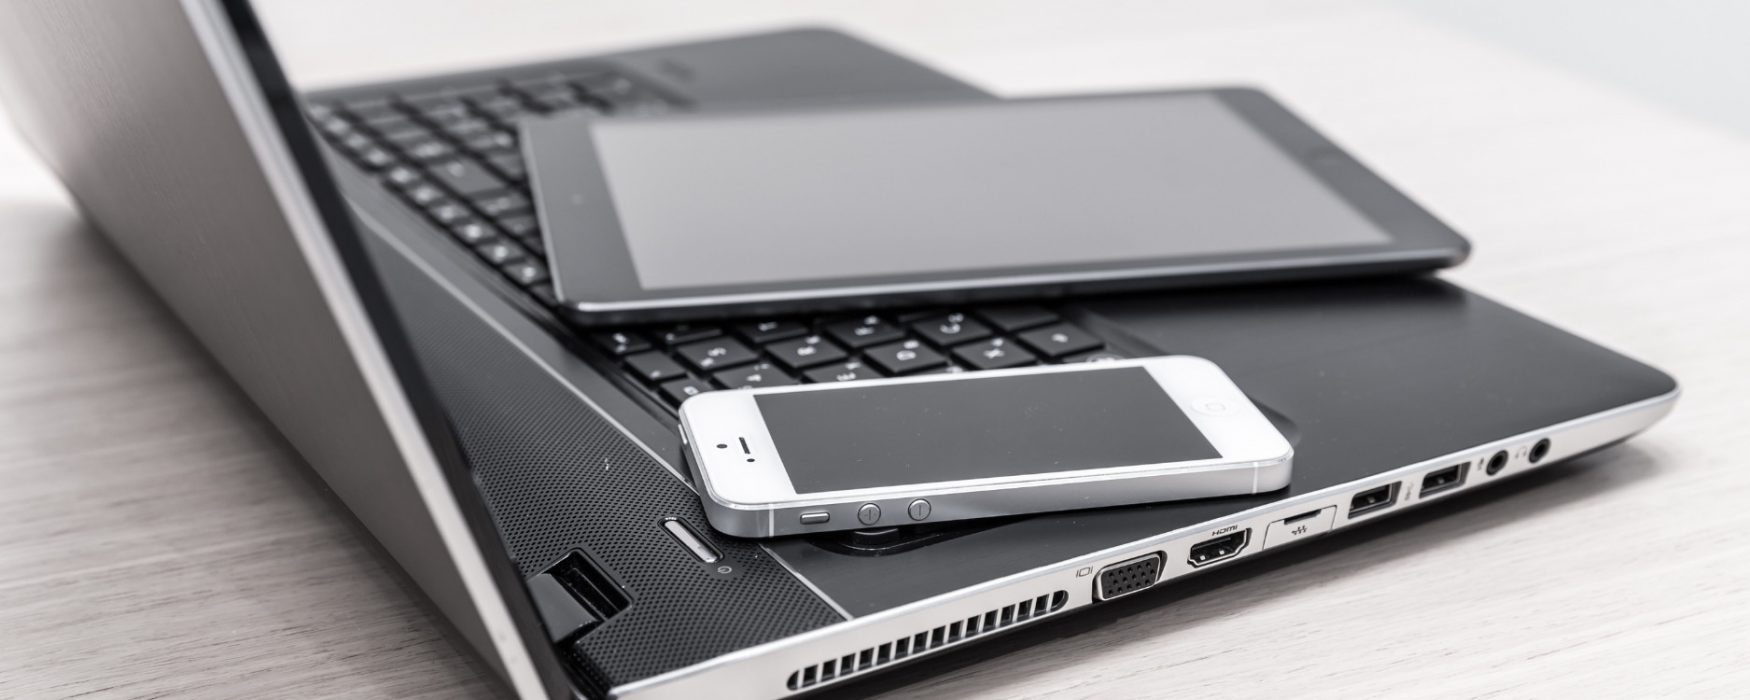 Image of three electronic devices stacked on each other and placed on a tabletop